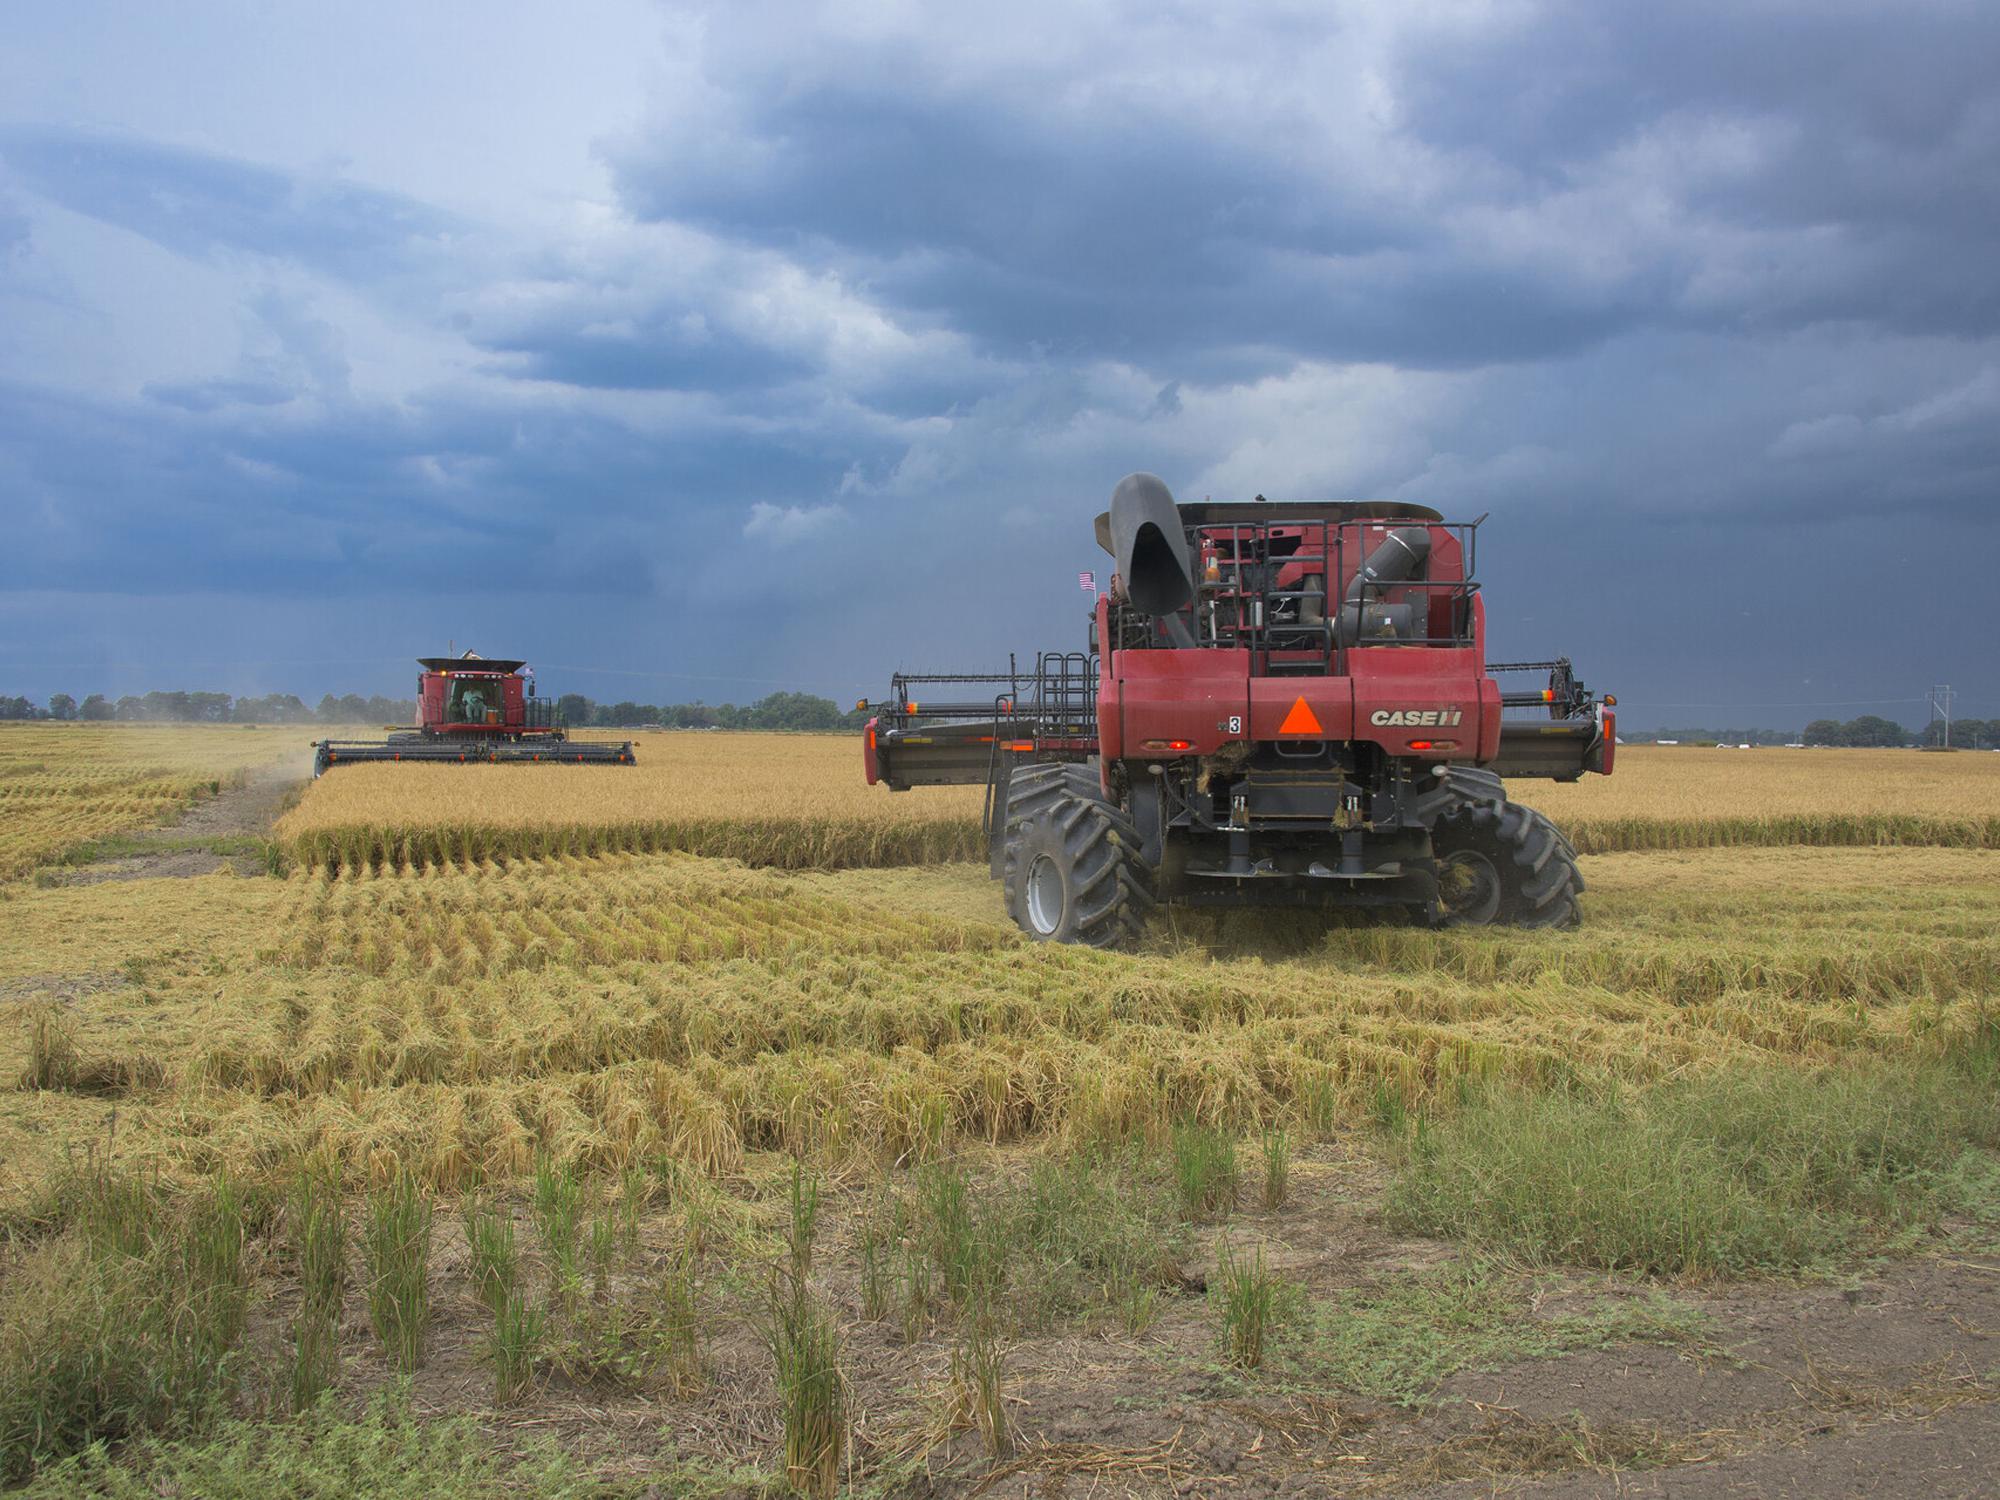 Two large, red farm machines sit in a partially harvested rice field under a dark-blue sky with lowering clouds